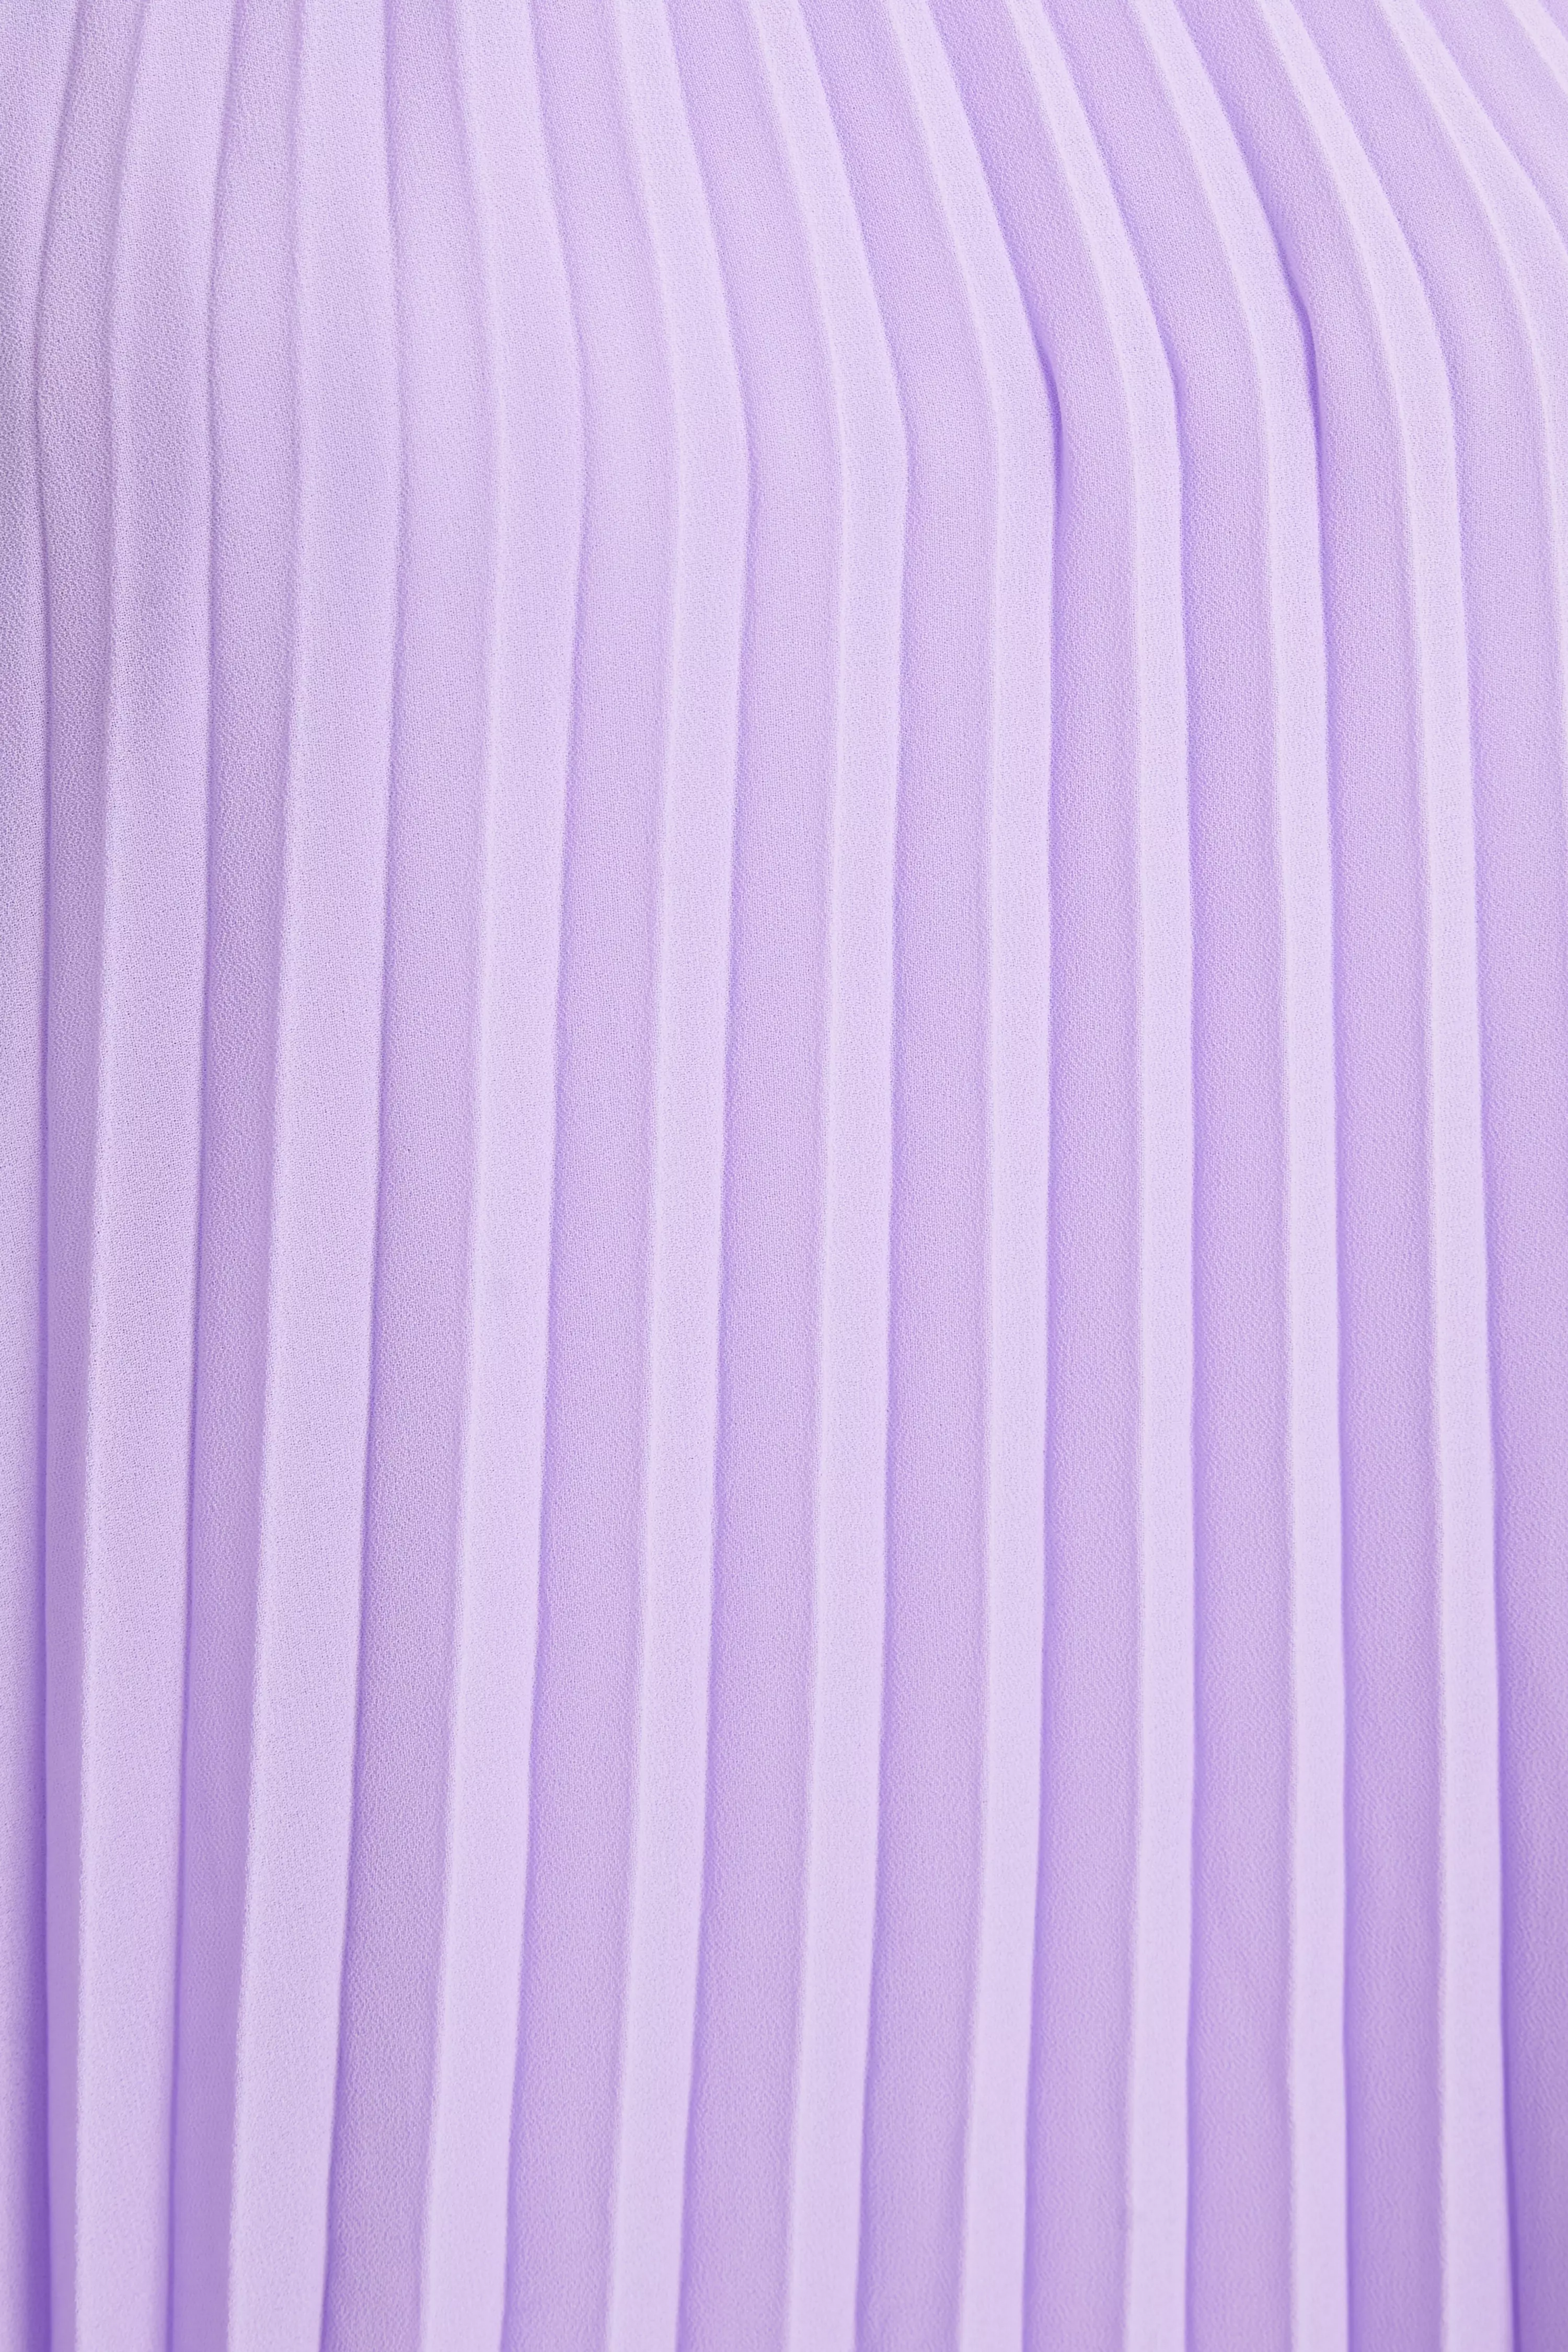 Lilac Chiffon Pleated High Neck Top